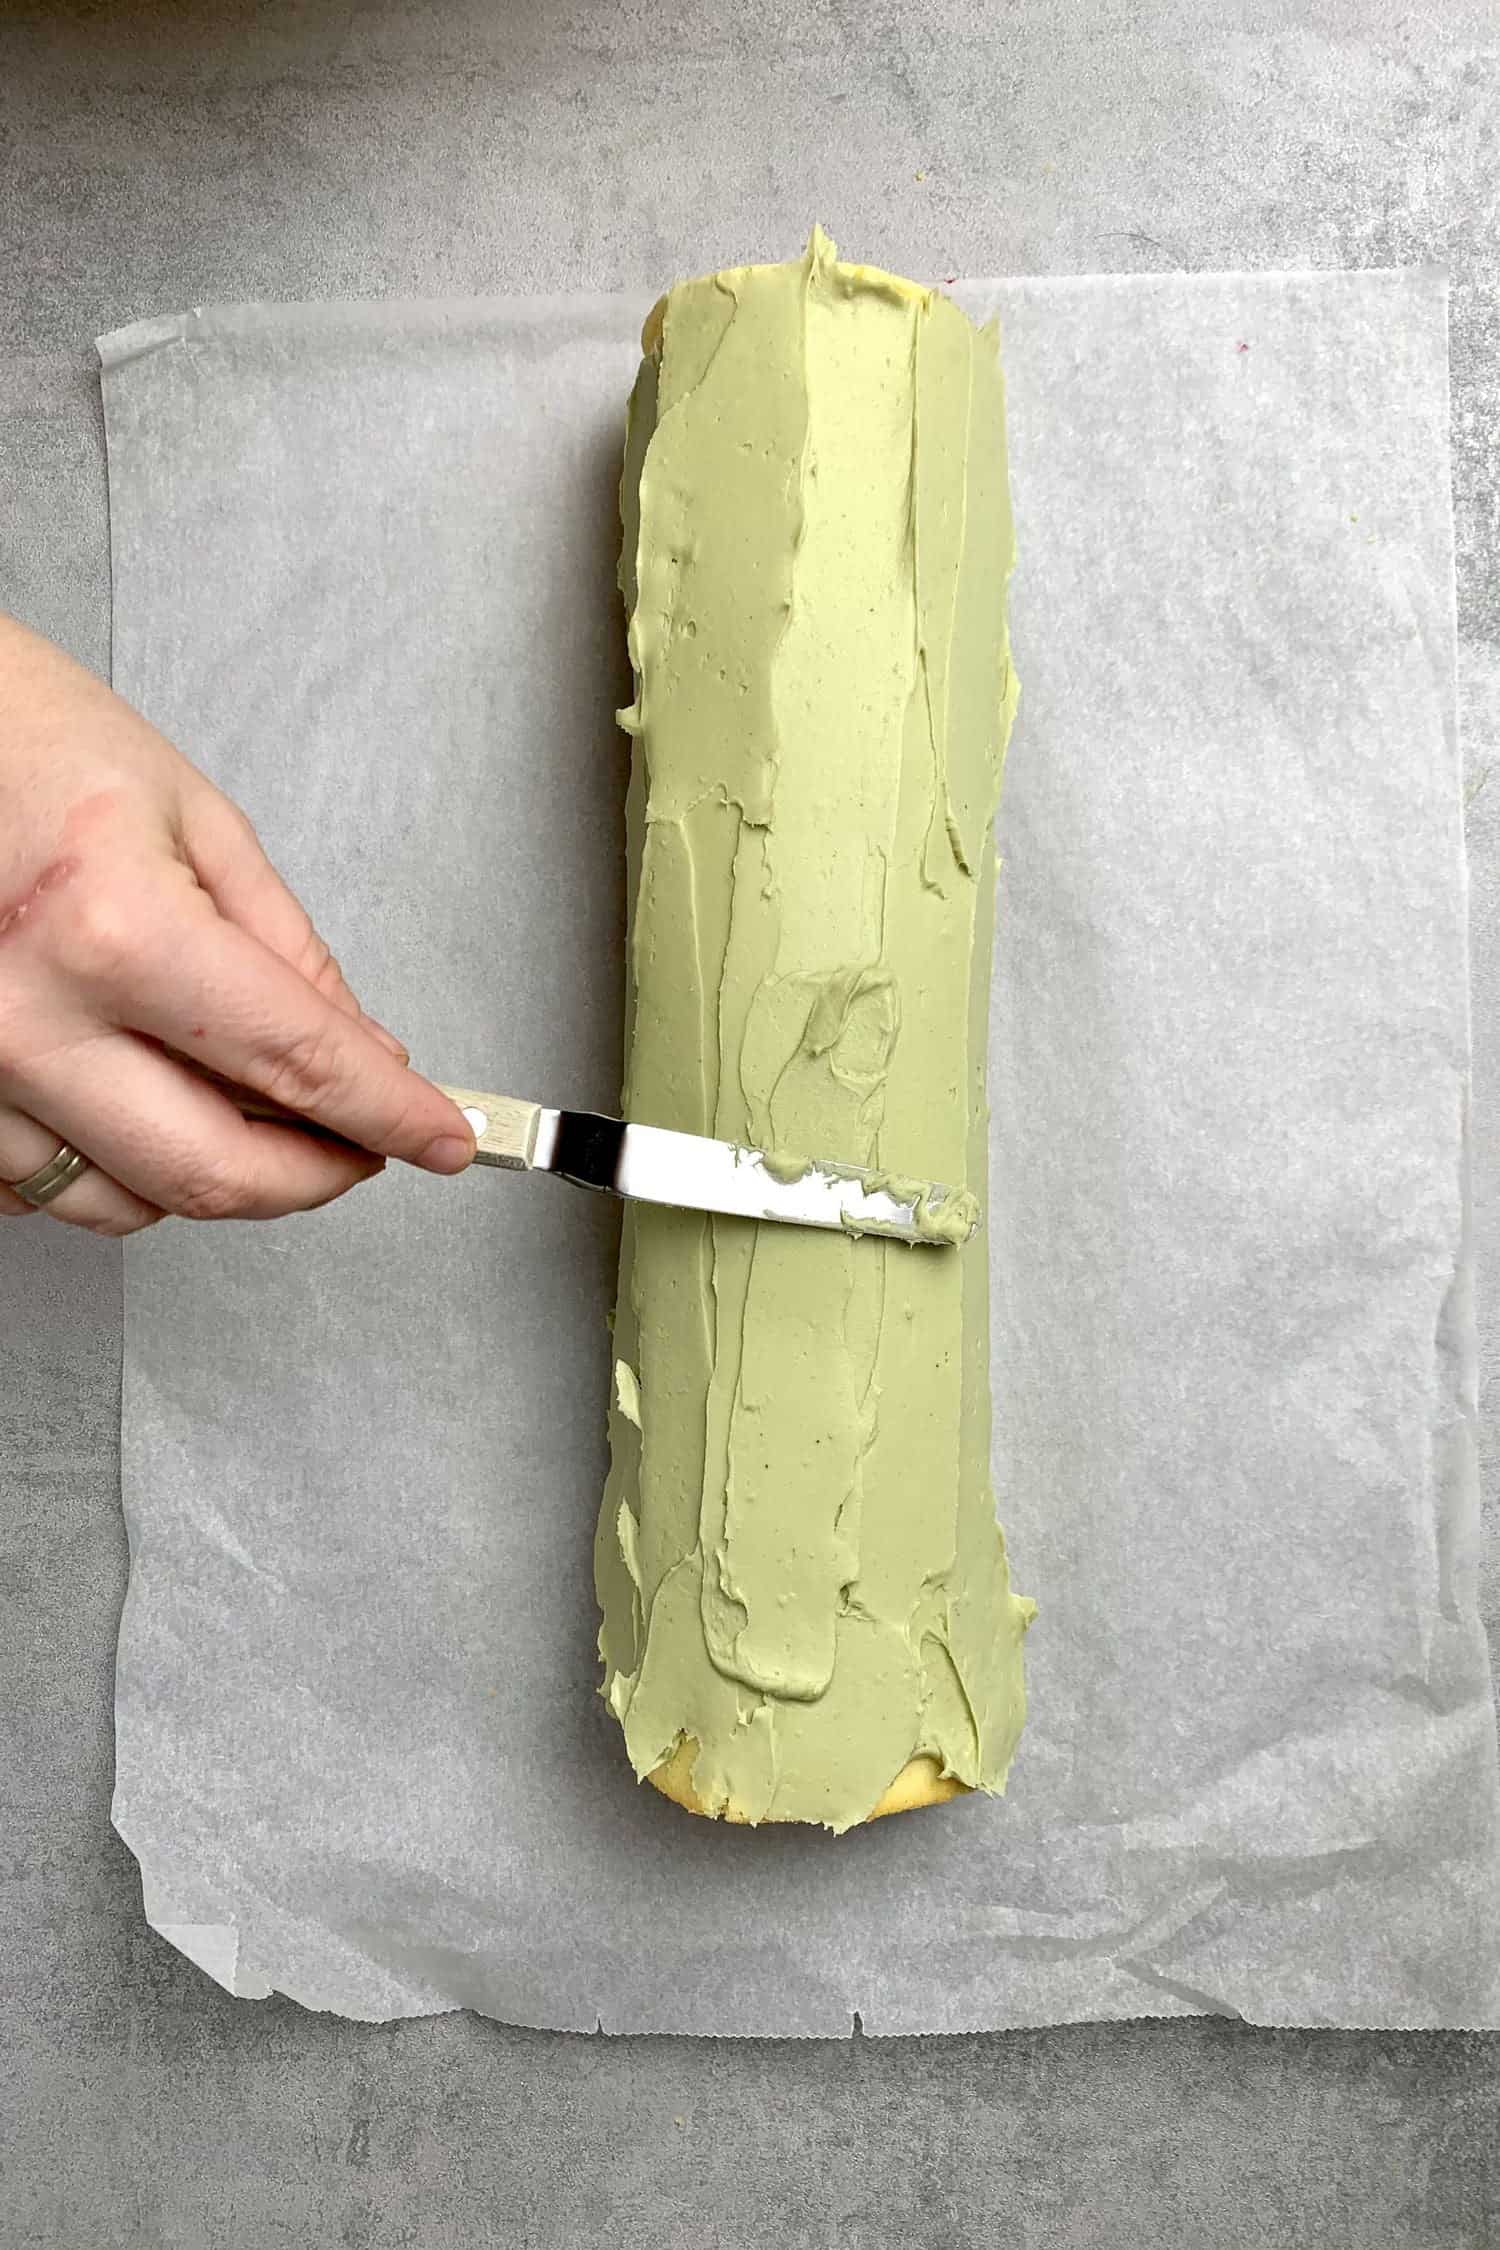 Apply the pistachio frosting on the cake roll.